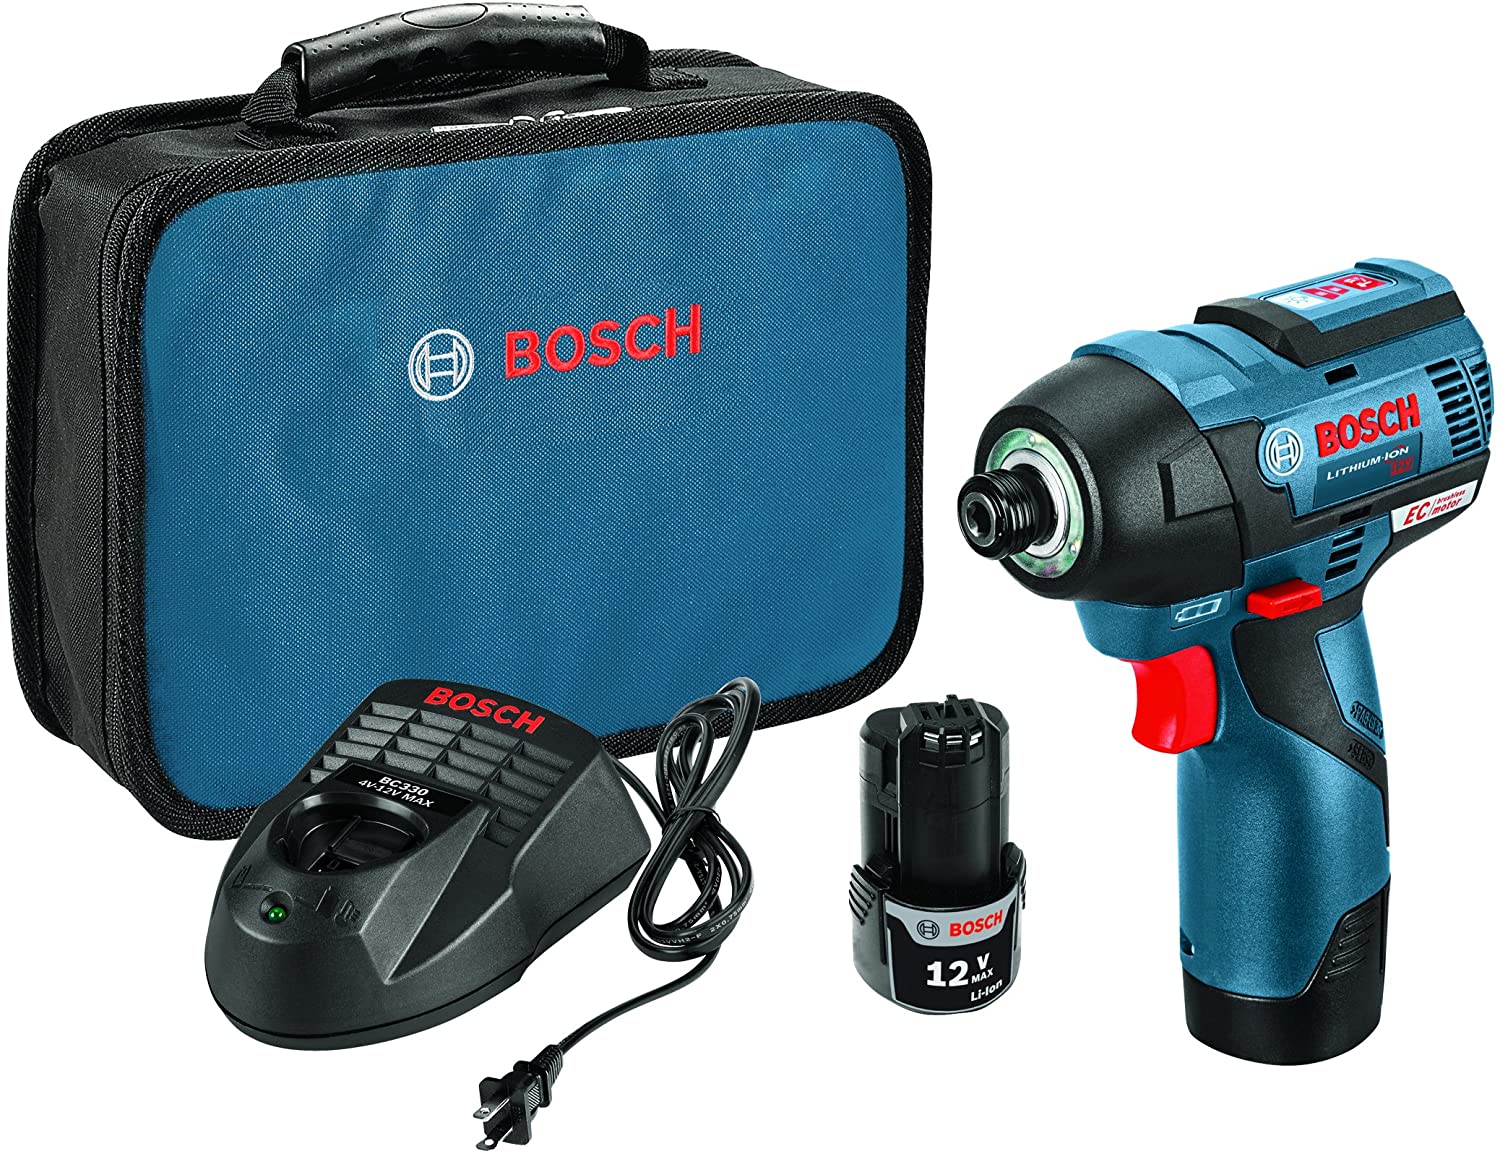 BOSCH PS42 02 Impact Driver pros and cons - Best Impact Driver in 2022 - The Definitive Guide: How to Cut Your Project Time in Half? - HandyMan.Guide - Impact Driver